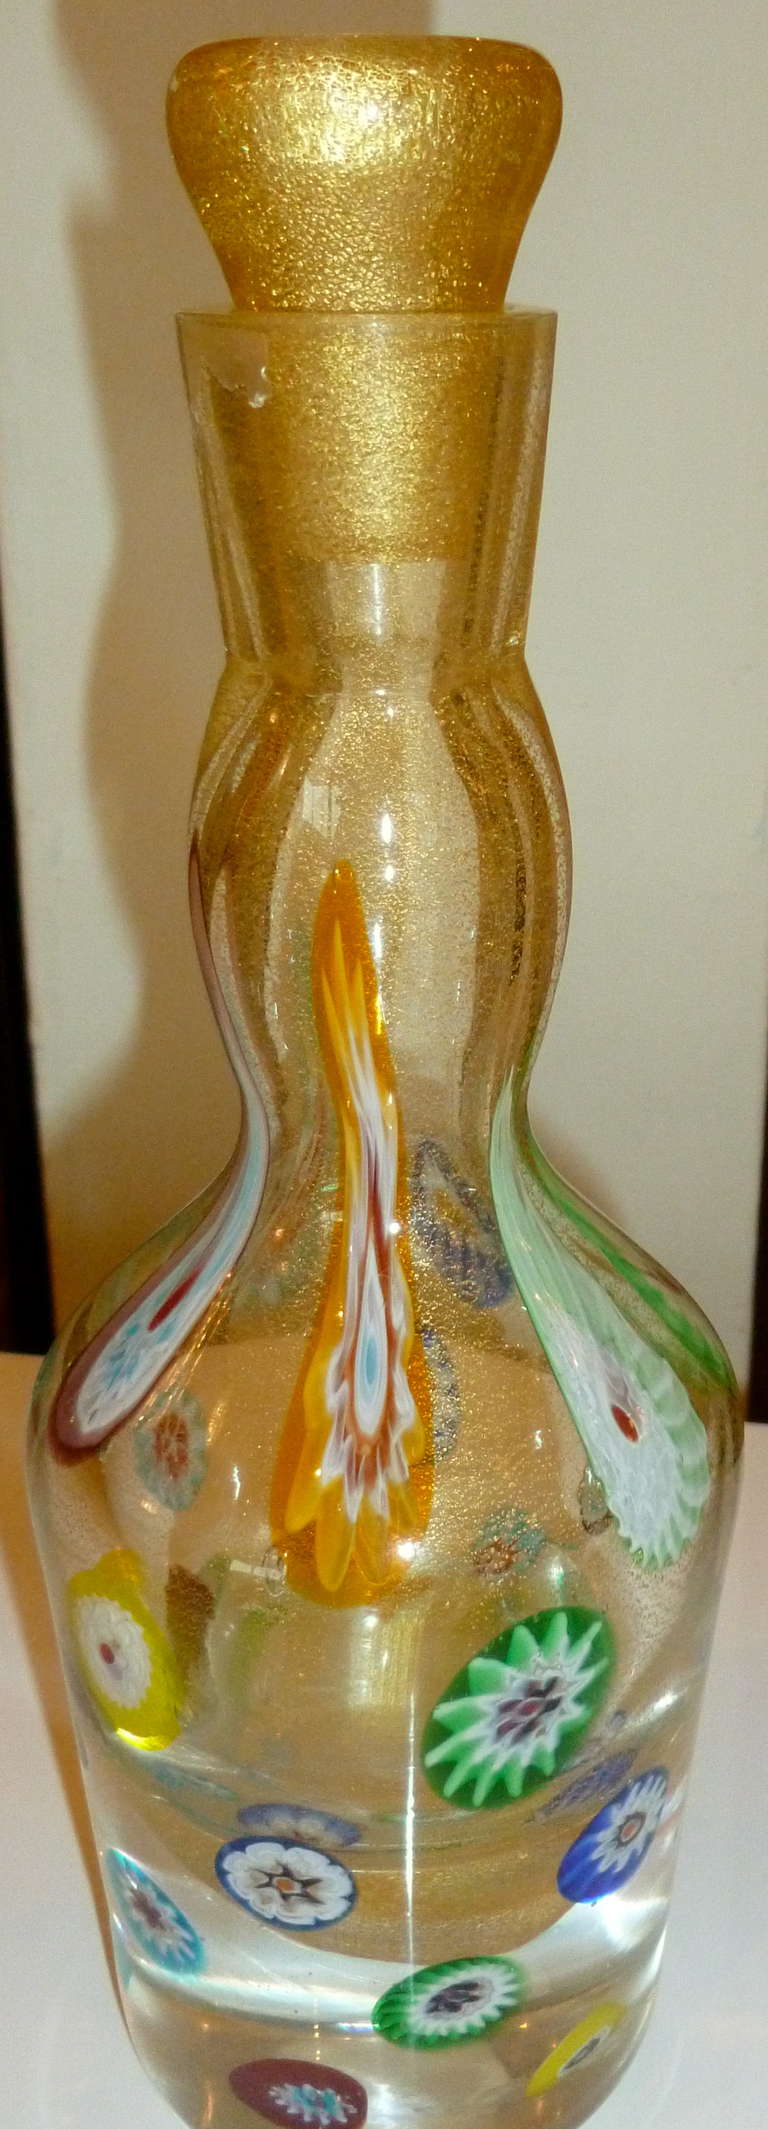 Mid-20th Century Fratelli Toso Murano Glass Decanter Perfume Bottle Gold Aventurine and
Murrhines For Sale